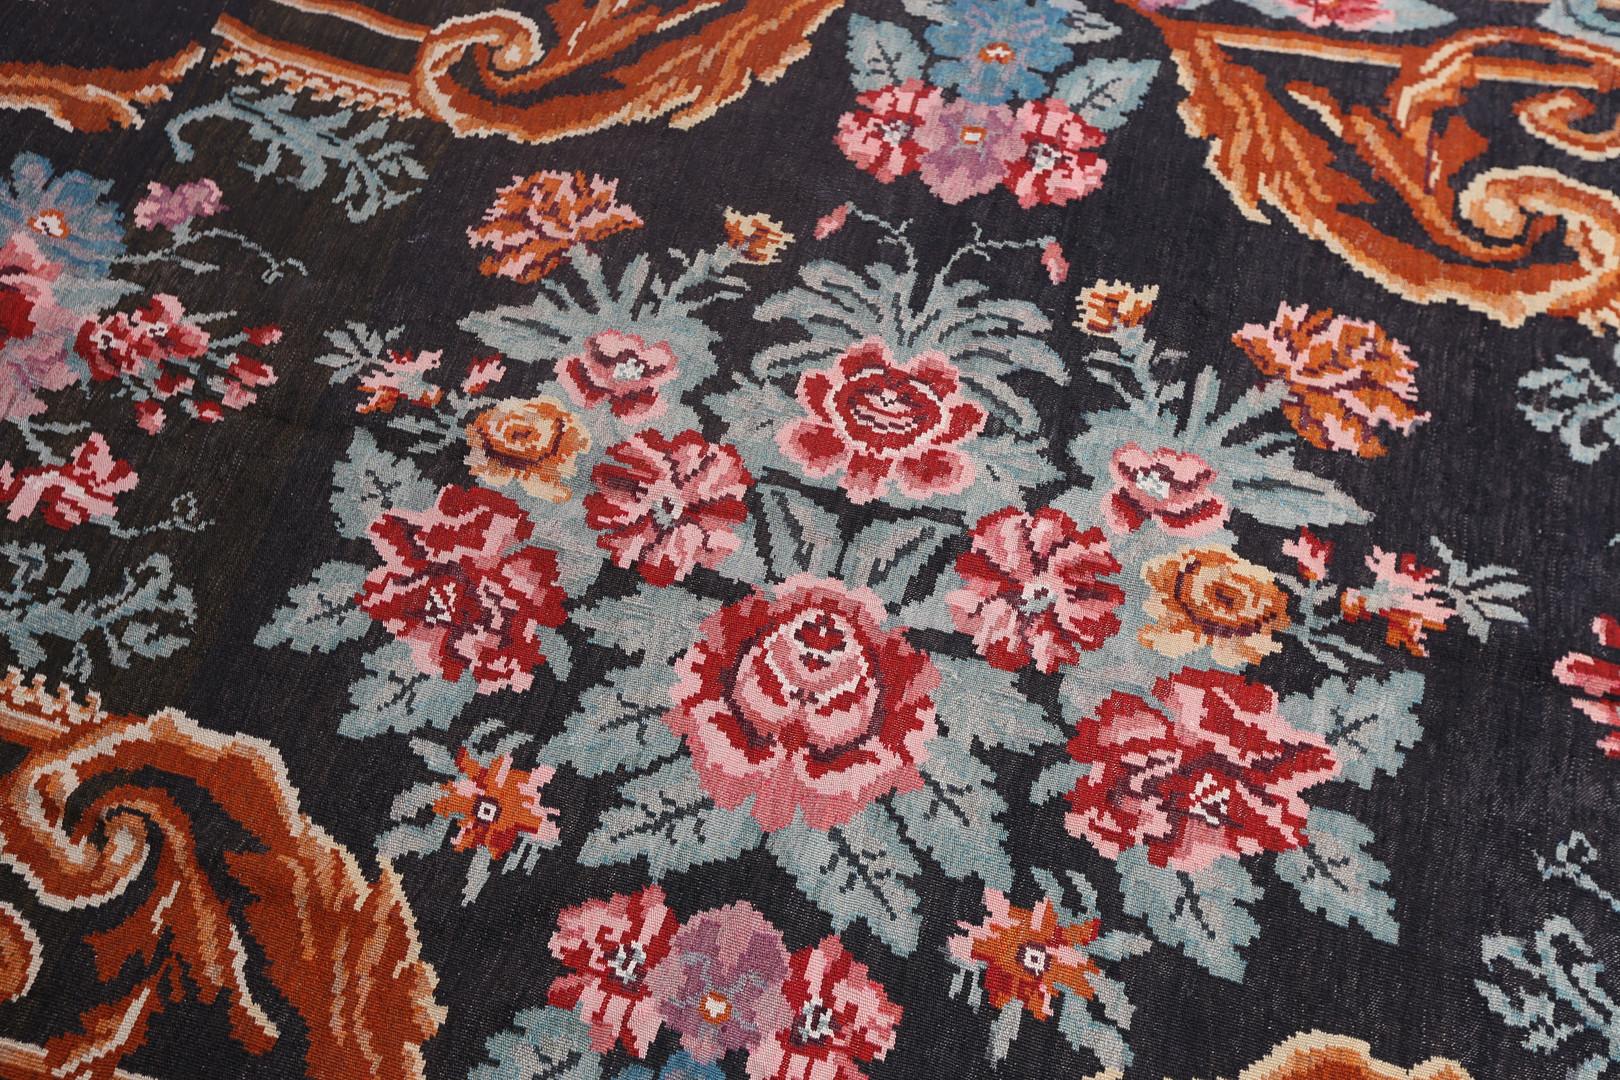 This luxurious antique floral rug is a Moldavian Kilim woven by hand in the 1940s. Elegantly woven roses flow through this design, woven symmetrically to create a beautiful, eye-catching display. Featuring a deep brown background with green, yellow,